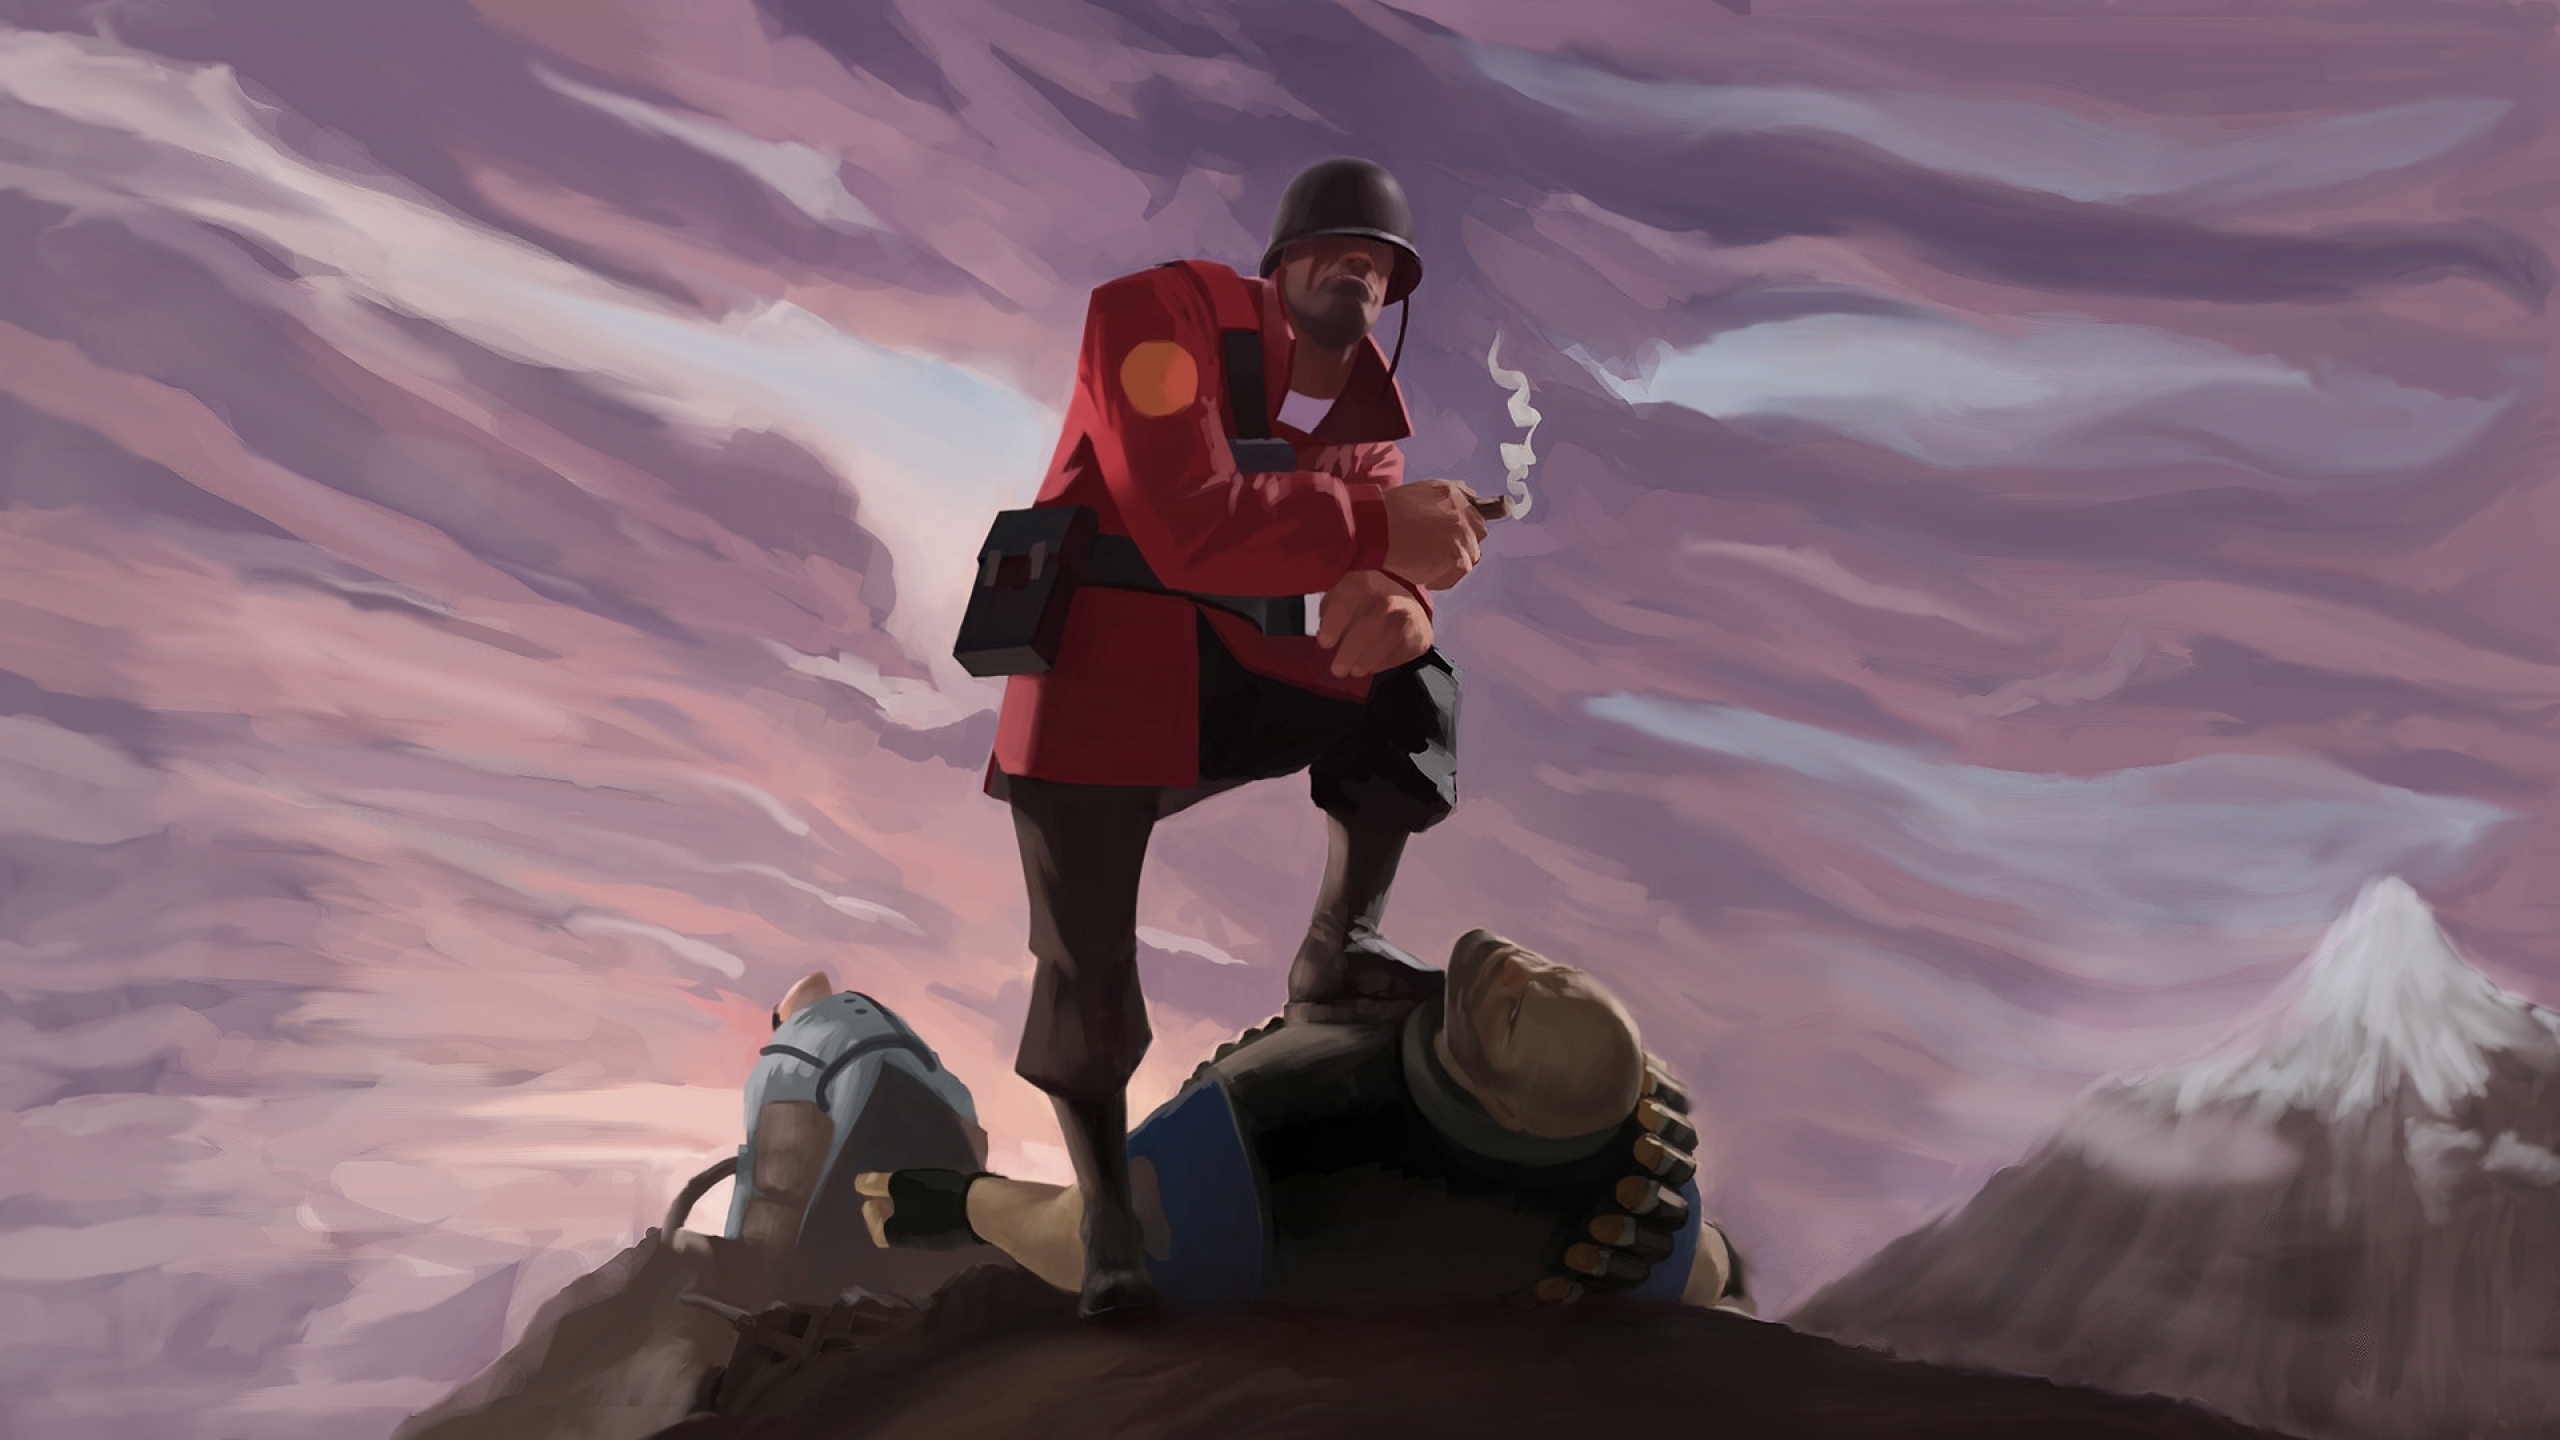 Tf2 Soldier Team Fortress Wallpaper High Quality